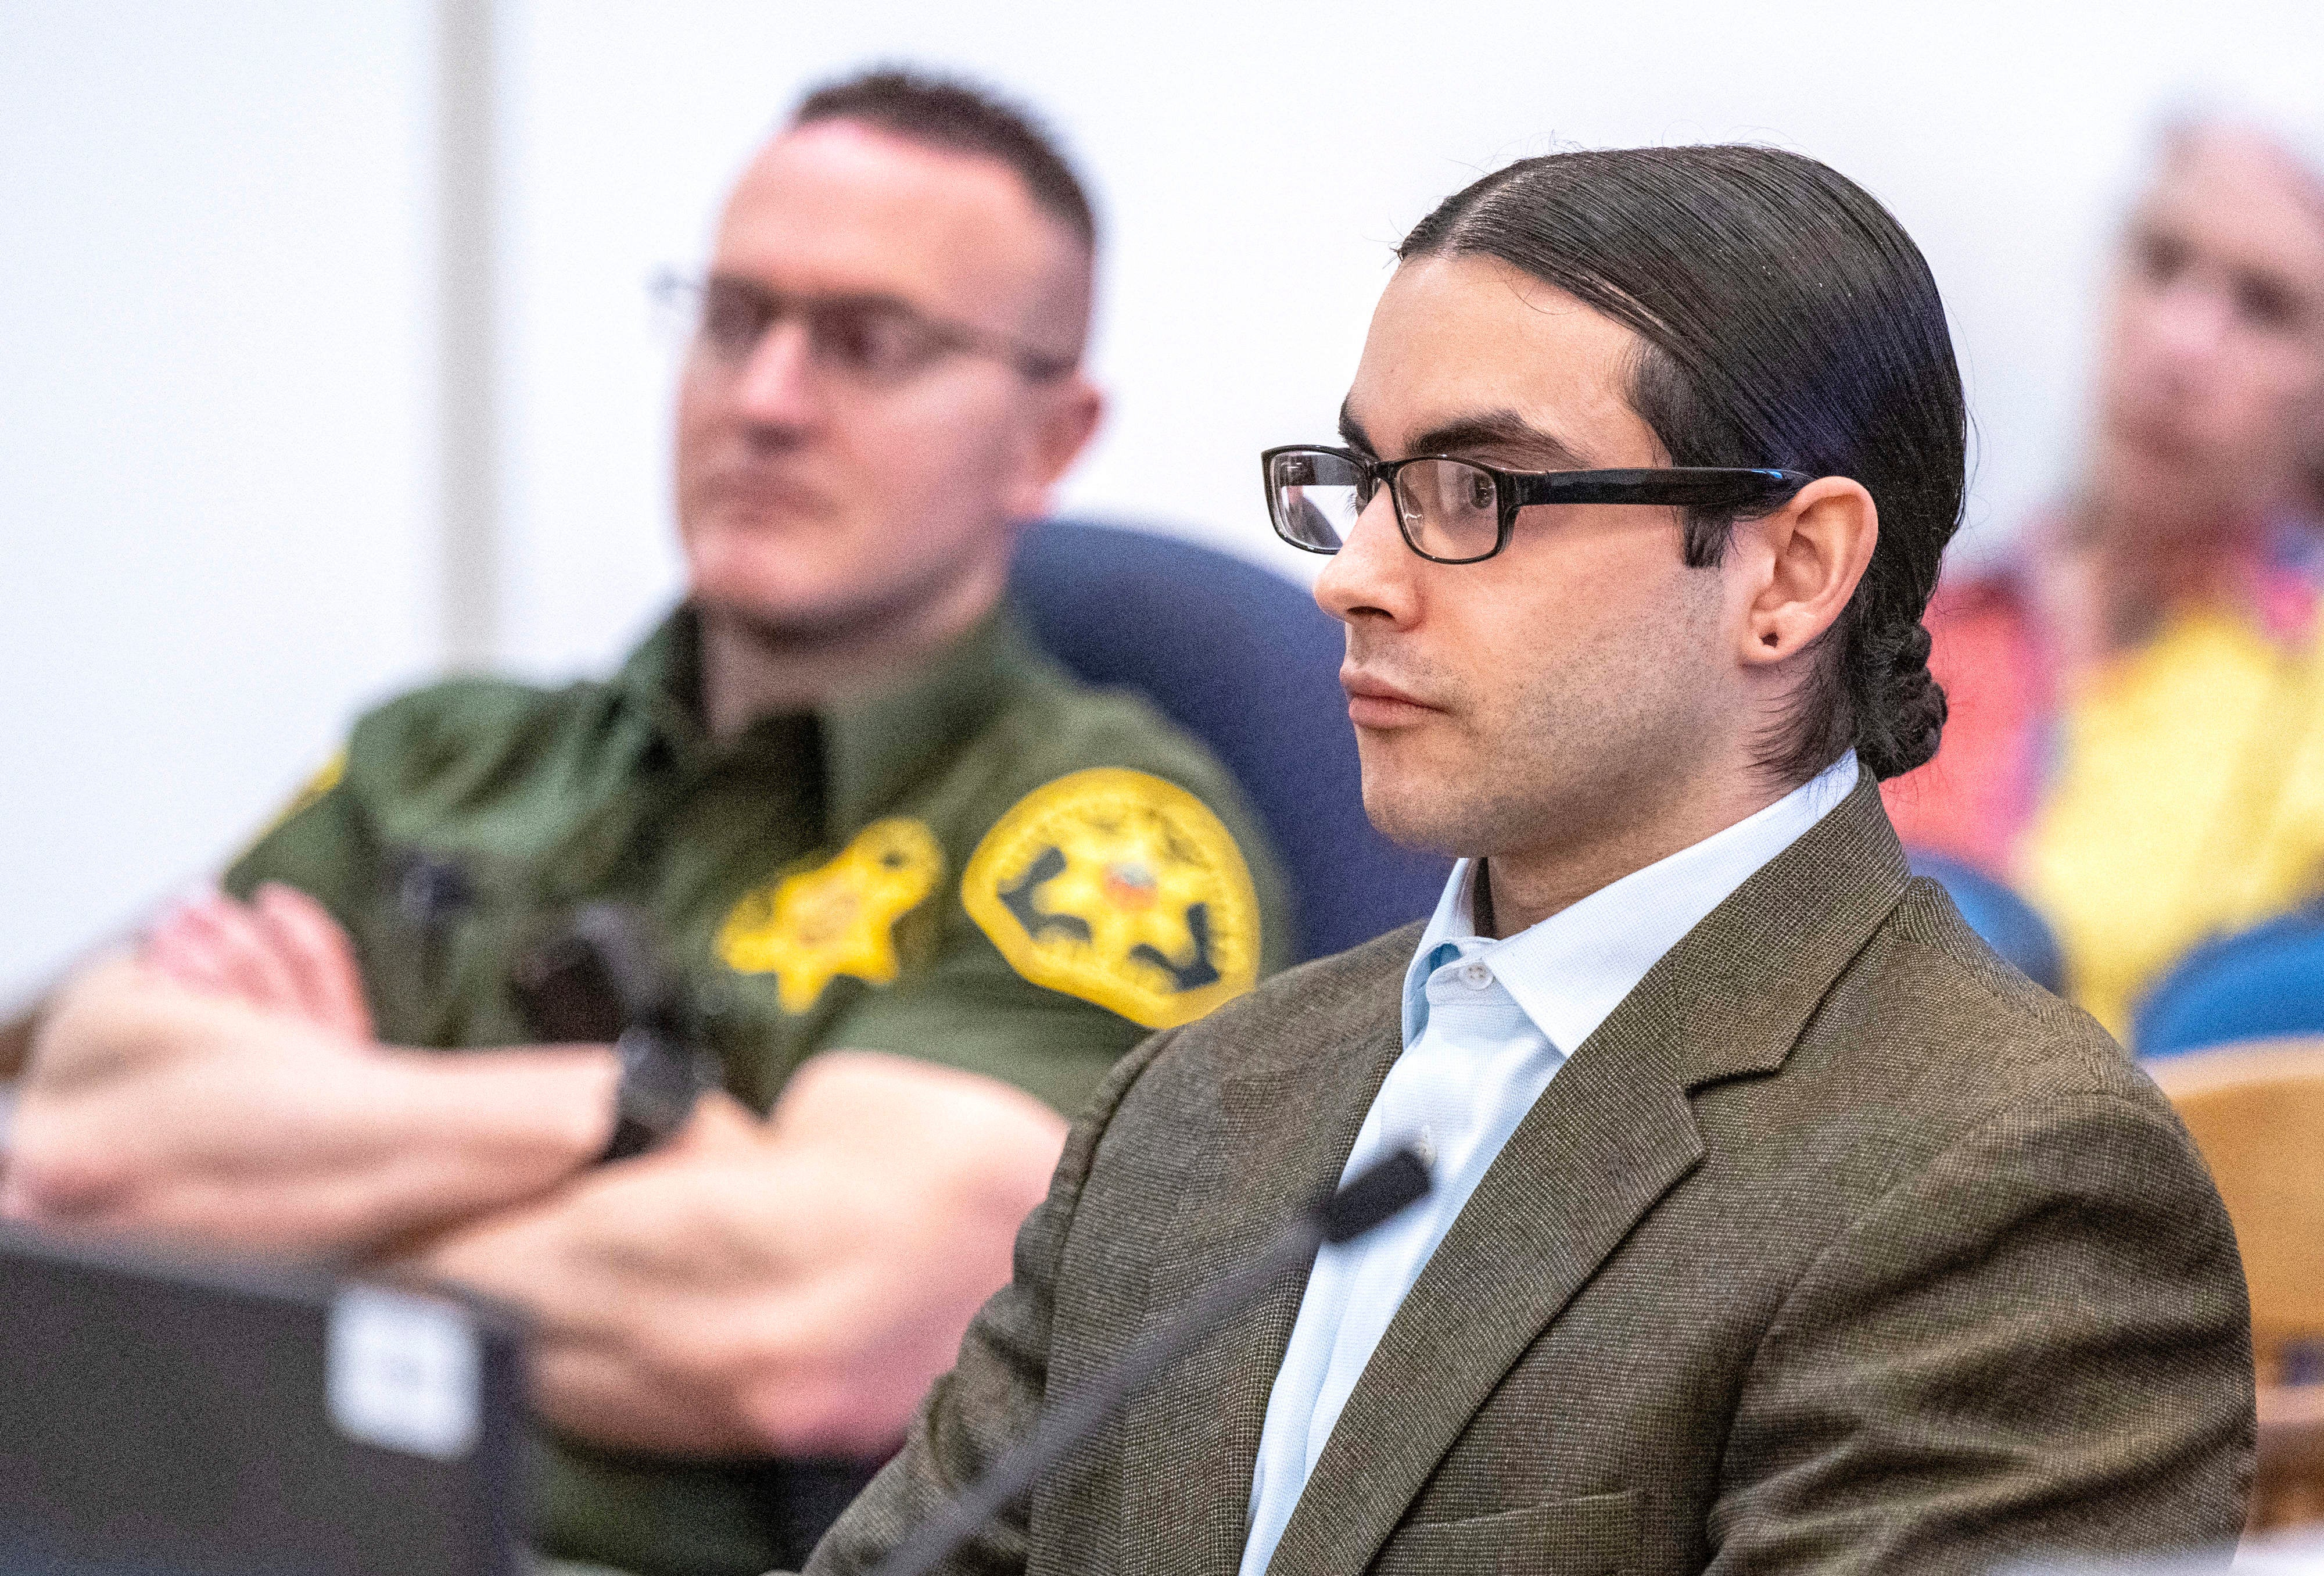 Marcus Eriz, pictured at his Friday sentencing, will spend at least 40 years in prison after killing six-year-old Aiden Leos